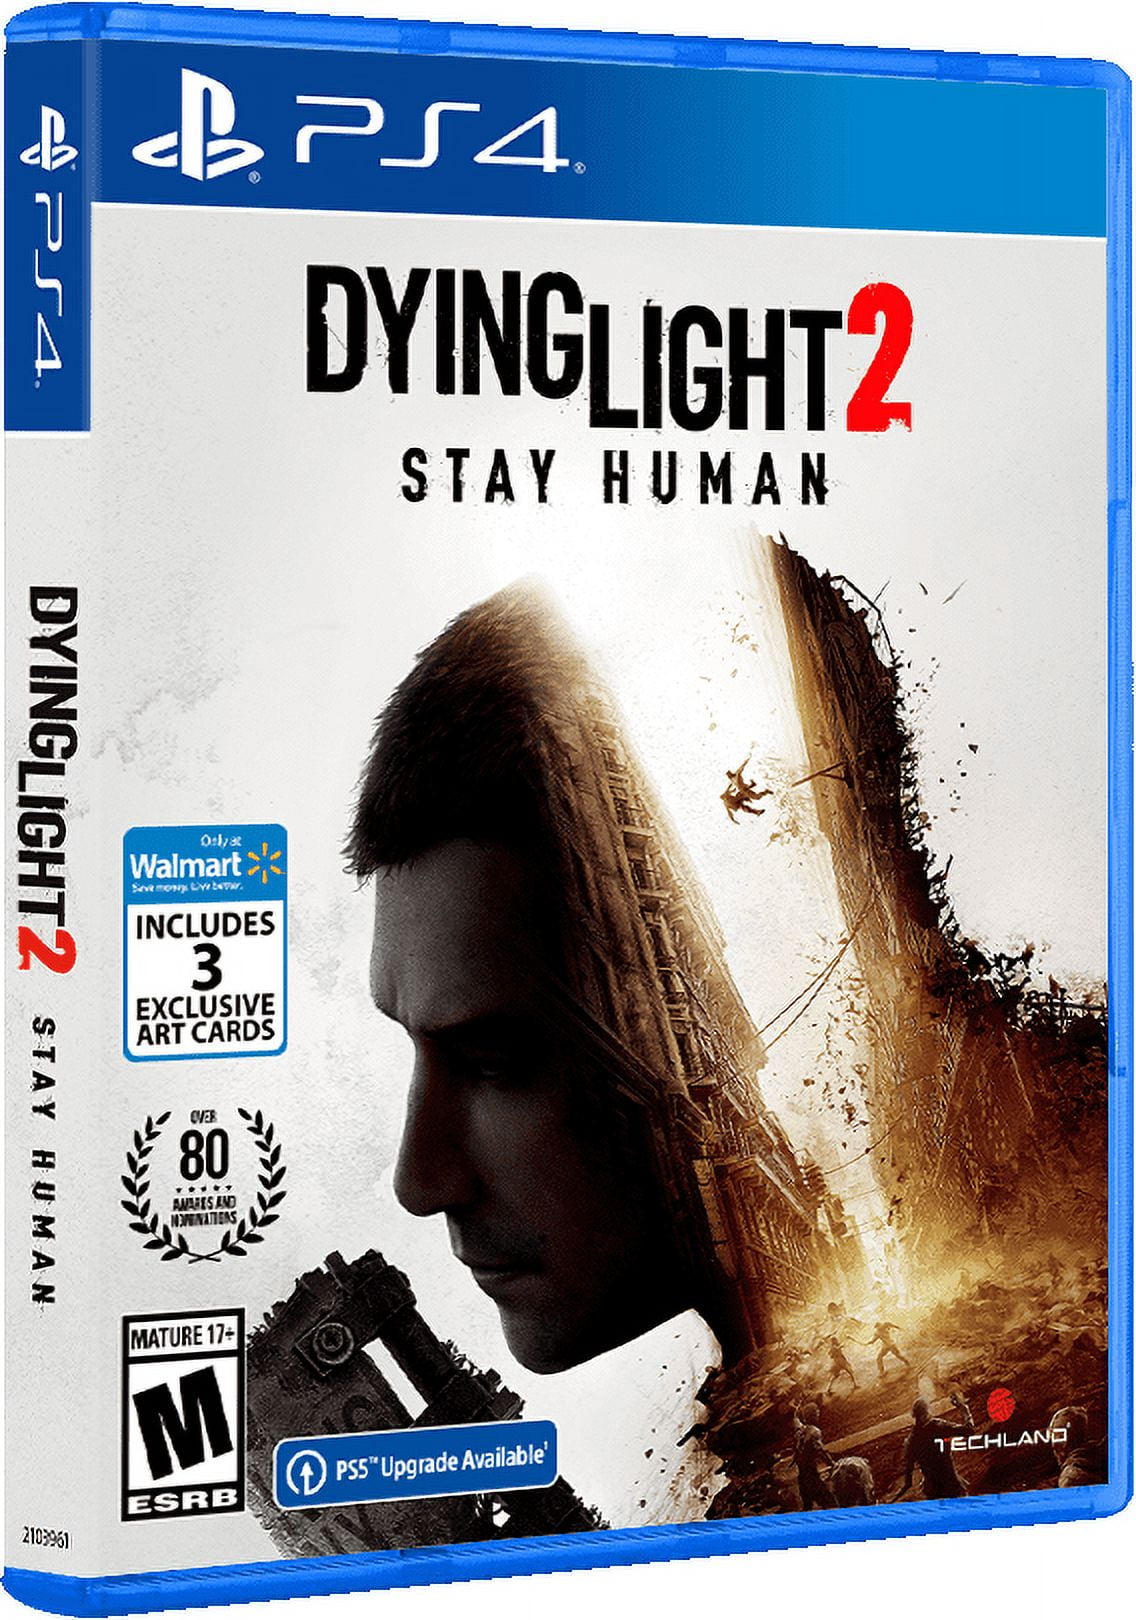 Dying Light 2 Stay Human Just Keeps Getting Bigger with a Whole